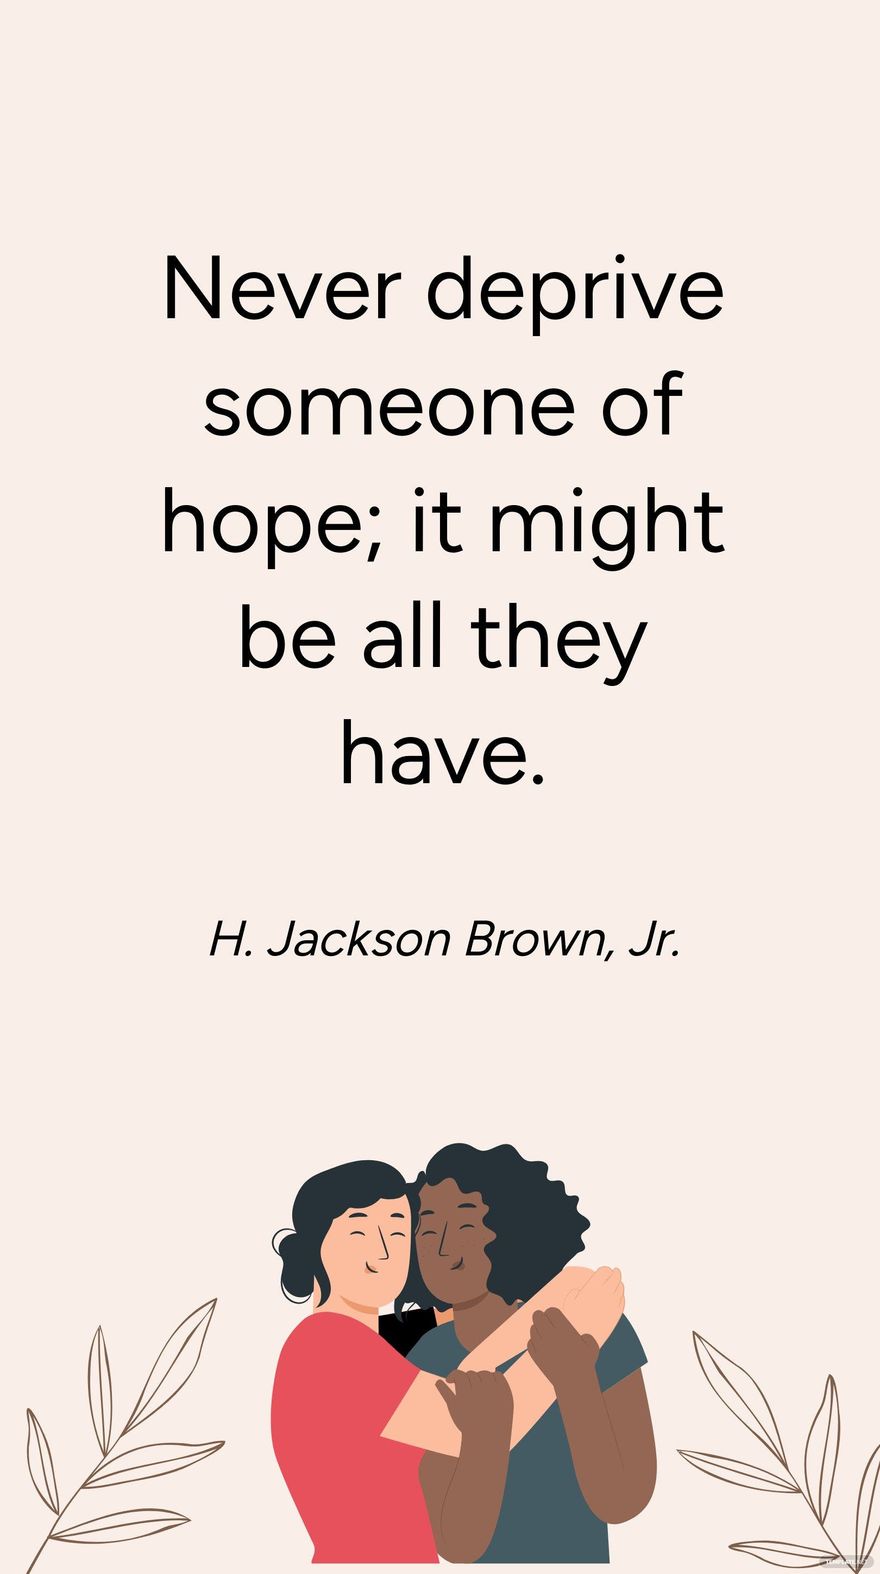 H. Jackson Brown, Jr. - Never deprive someone of hope; it might be all they have.